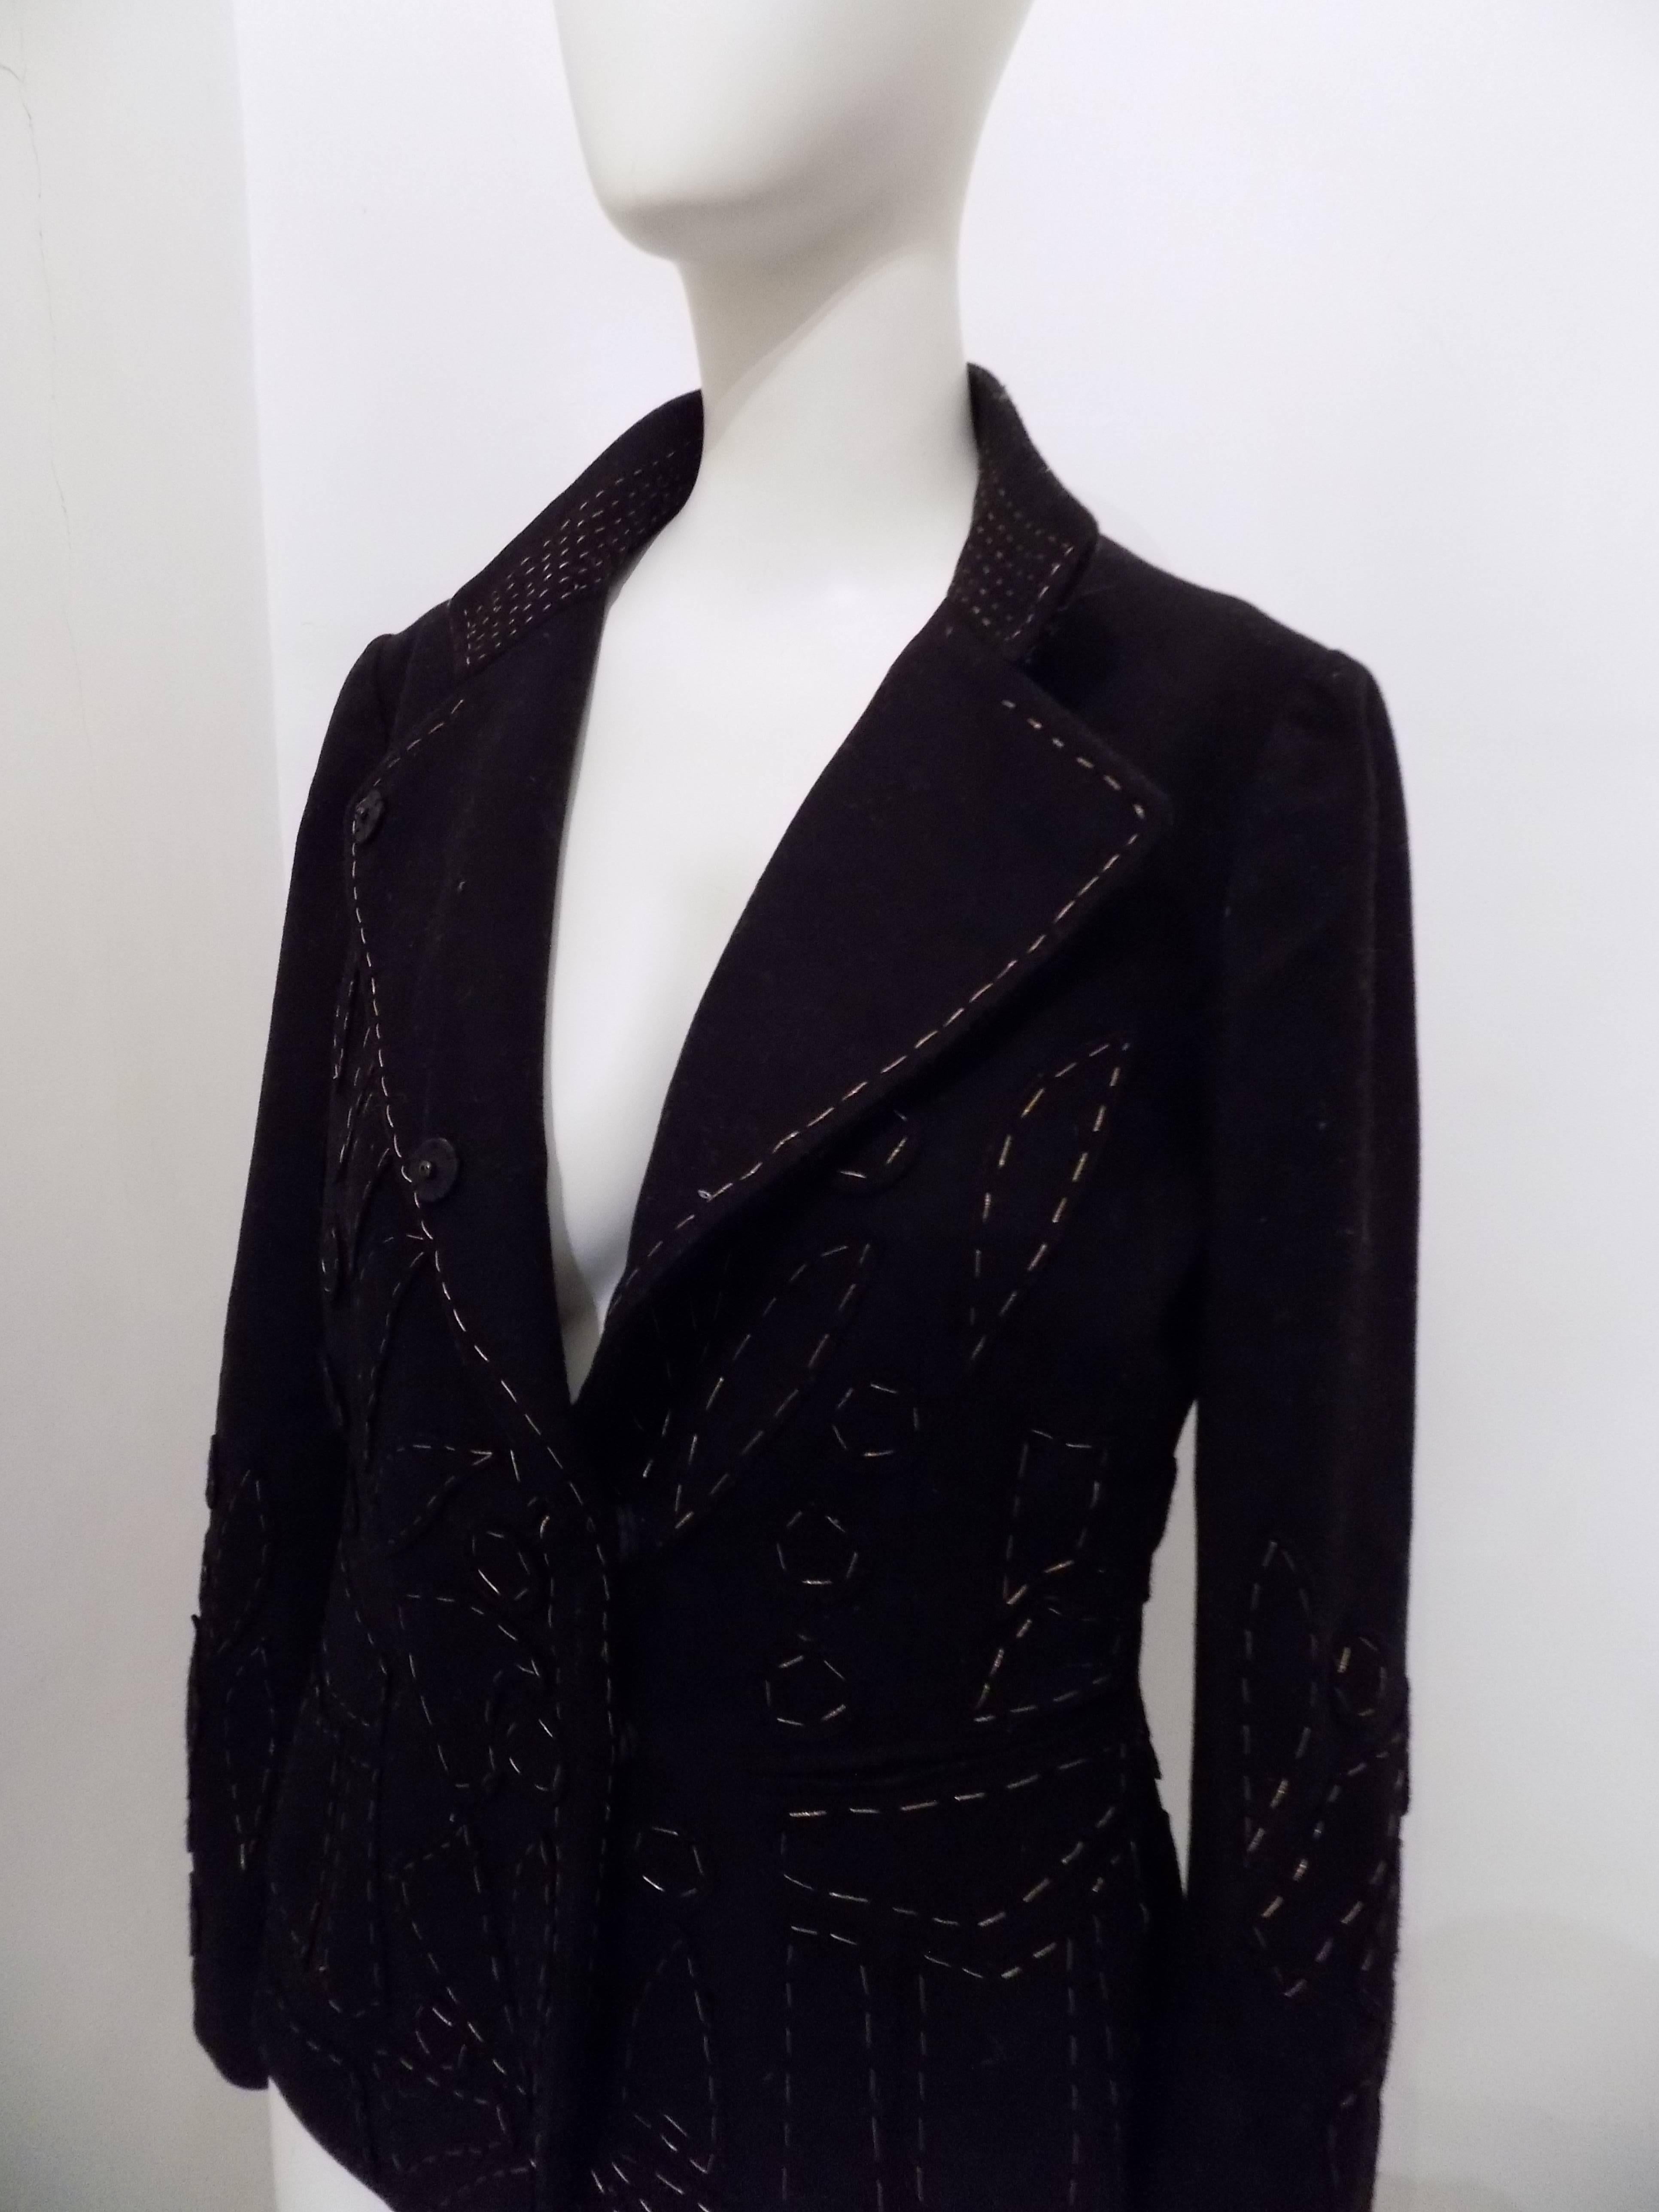 Moschino Black Jacket 
Black jacket with gold tone stamps all over
totally made in italy in italian size range m